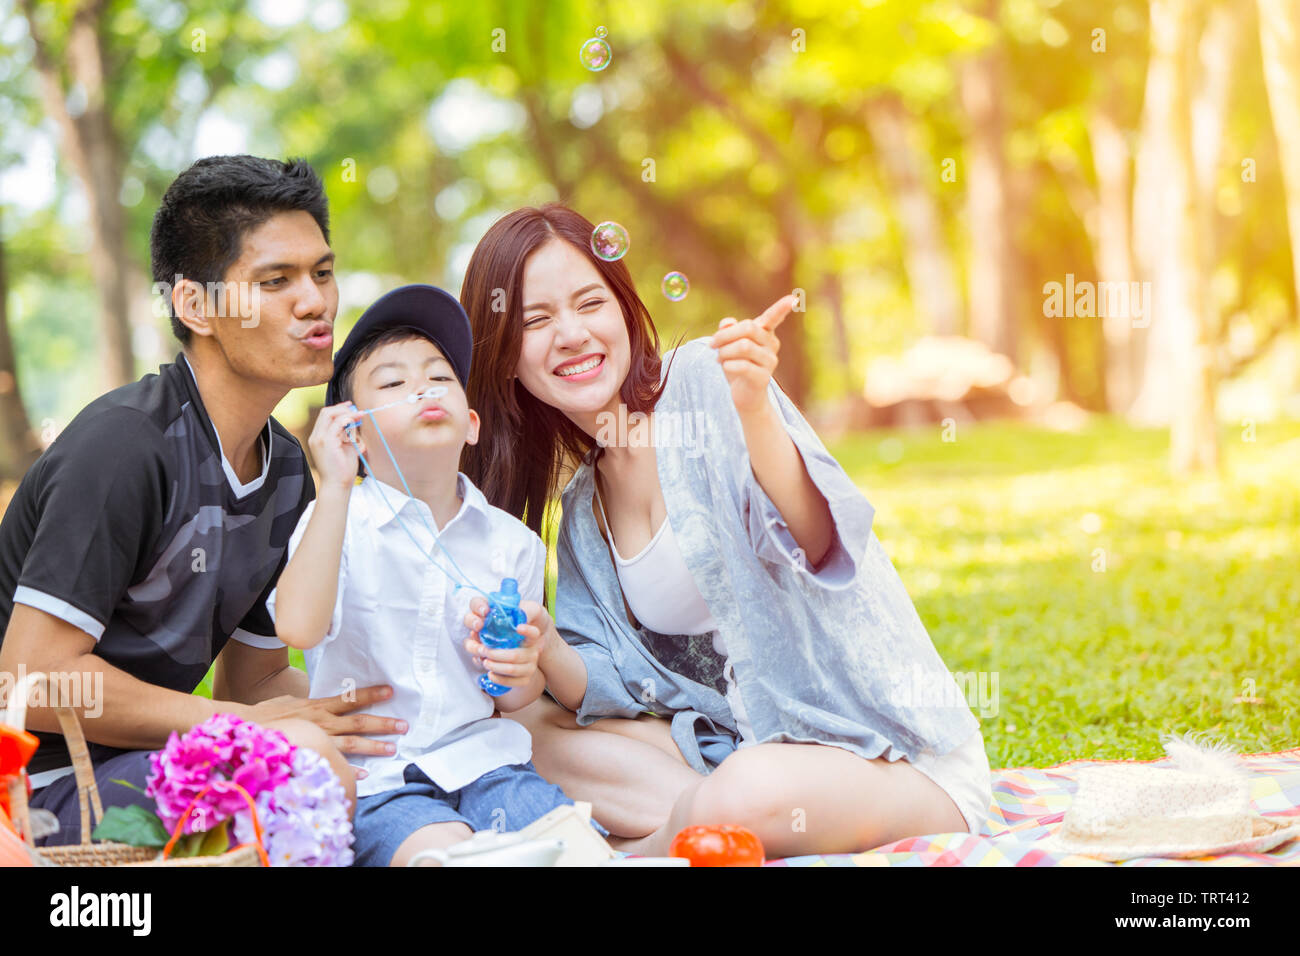 Asian Family Enjoying Playing Bubble Together in Green Park Natural outdoor background Stock Photo